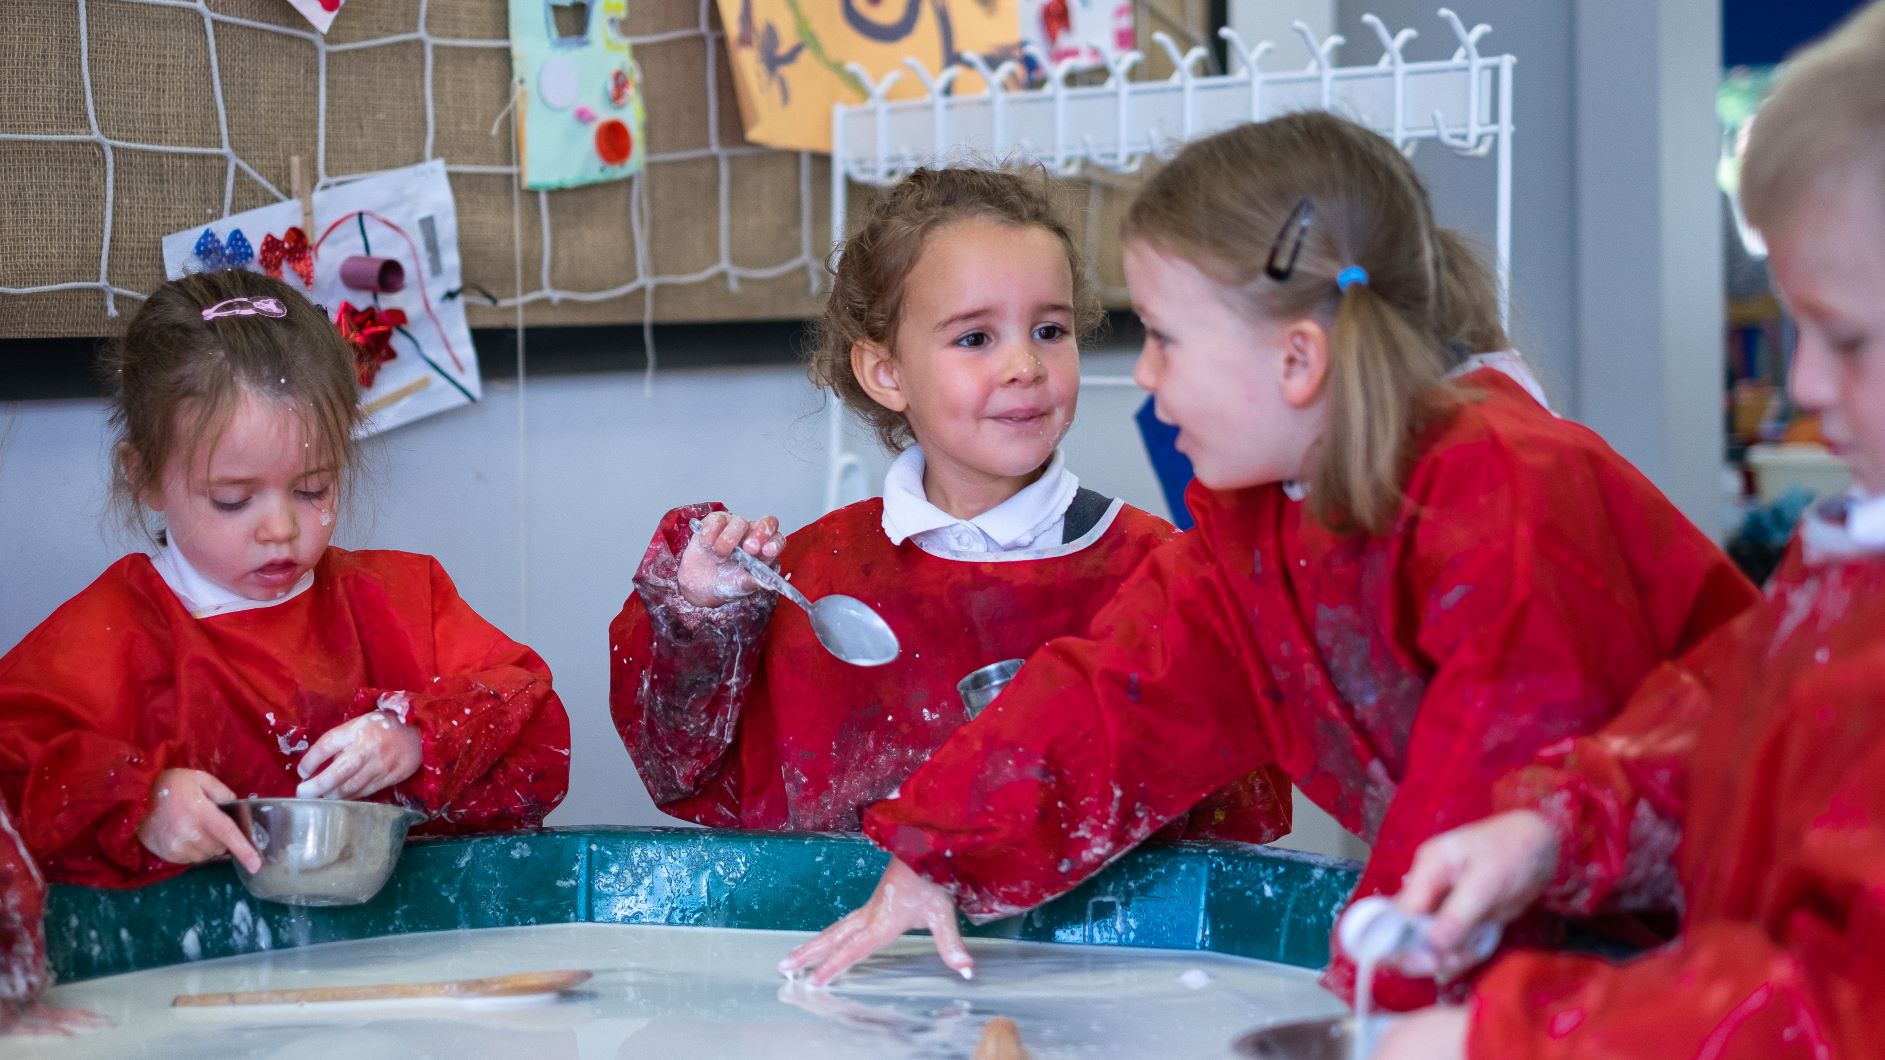 Three girls in the Reception class are wearing aprons while they engage in messy play, using water and kitchen utensils